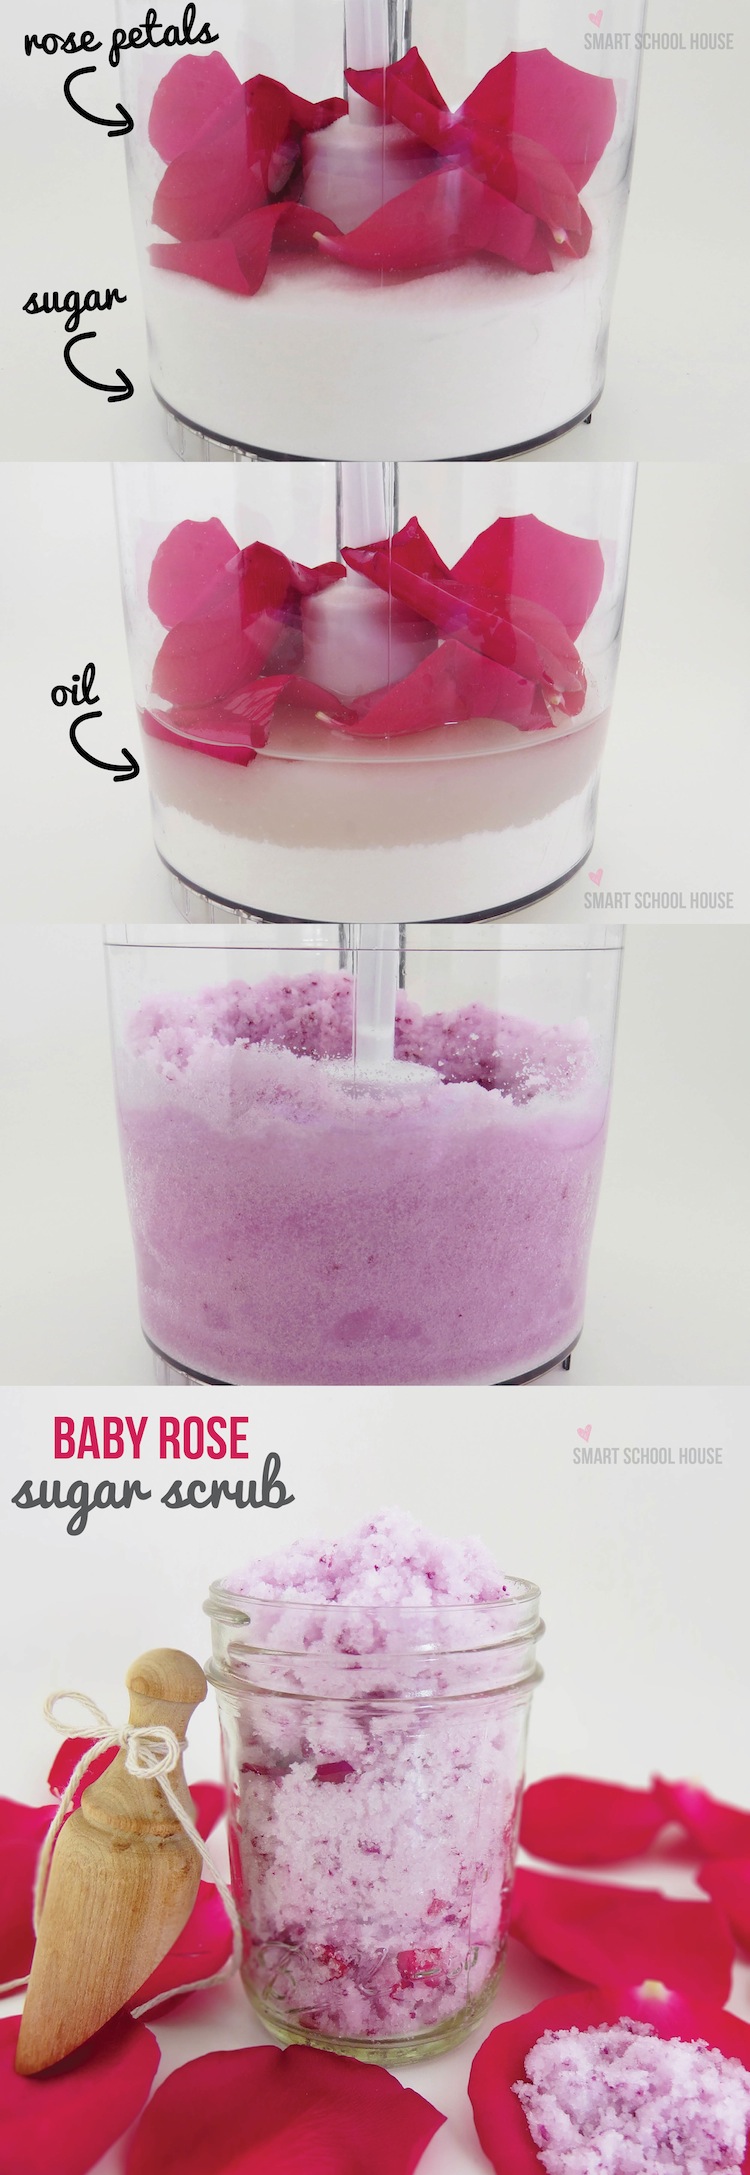 A simple DIY sugar scrub that you can make with the leftover petals from a bouquet of roses! Baby Rose Sugar Scrub #DIY #SugarScrub